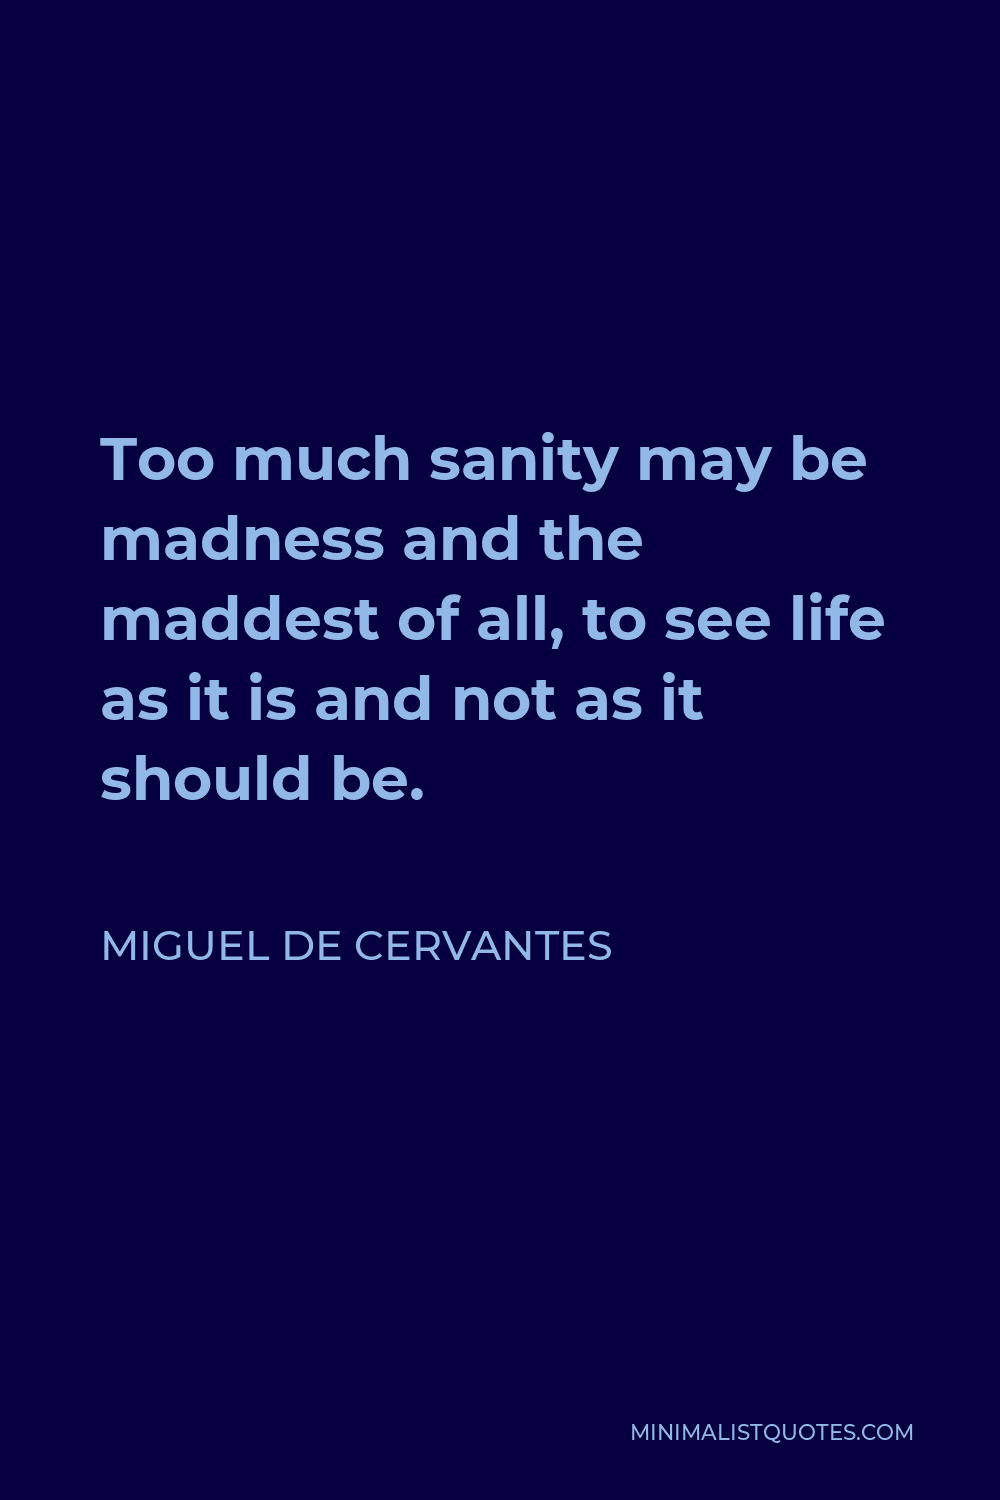 Miguel de Cervantes Quote - Too much sanity may be madness and the maddest of all, to see life as it is and not as it should be.